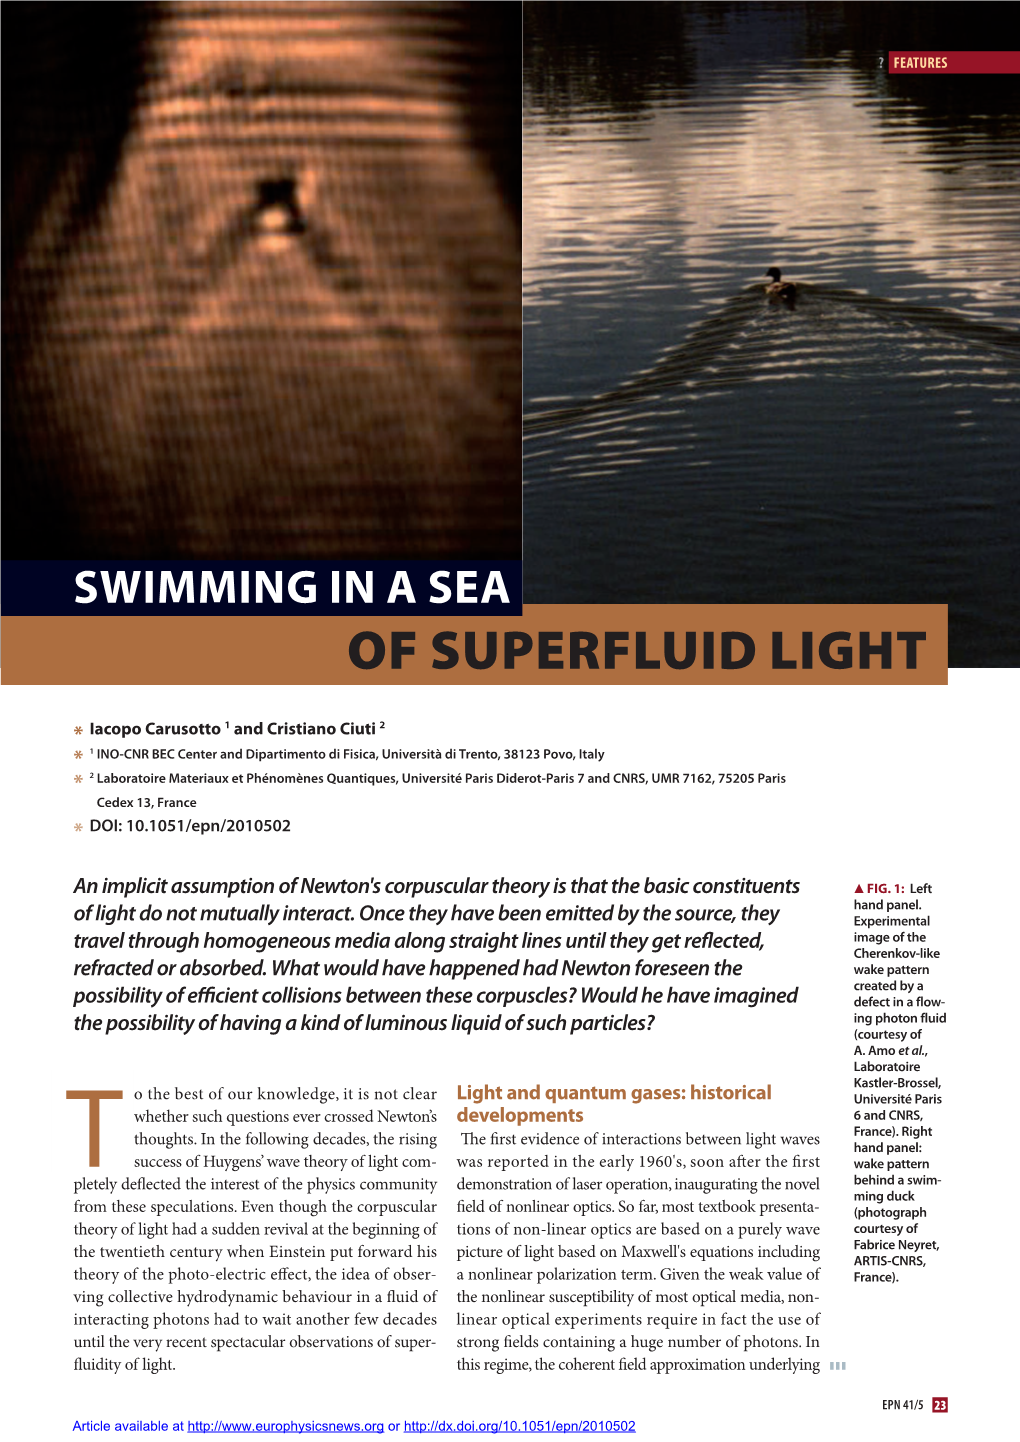 SWIMMING in a SEA of Superfluid Light